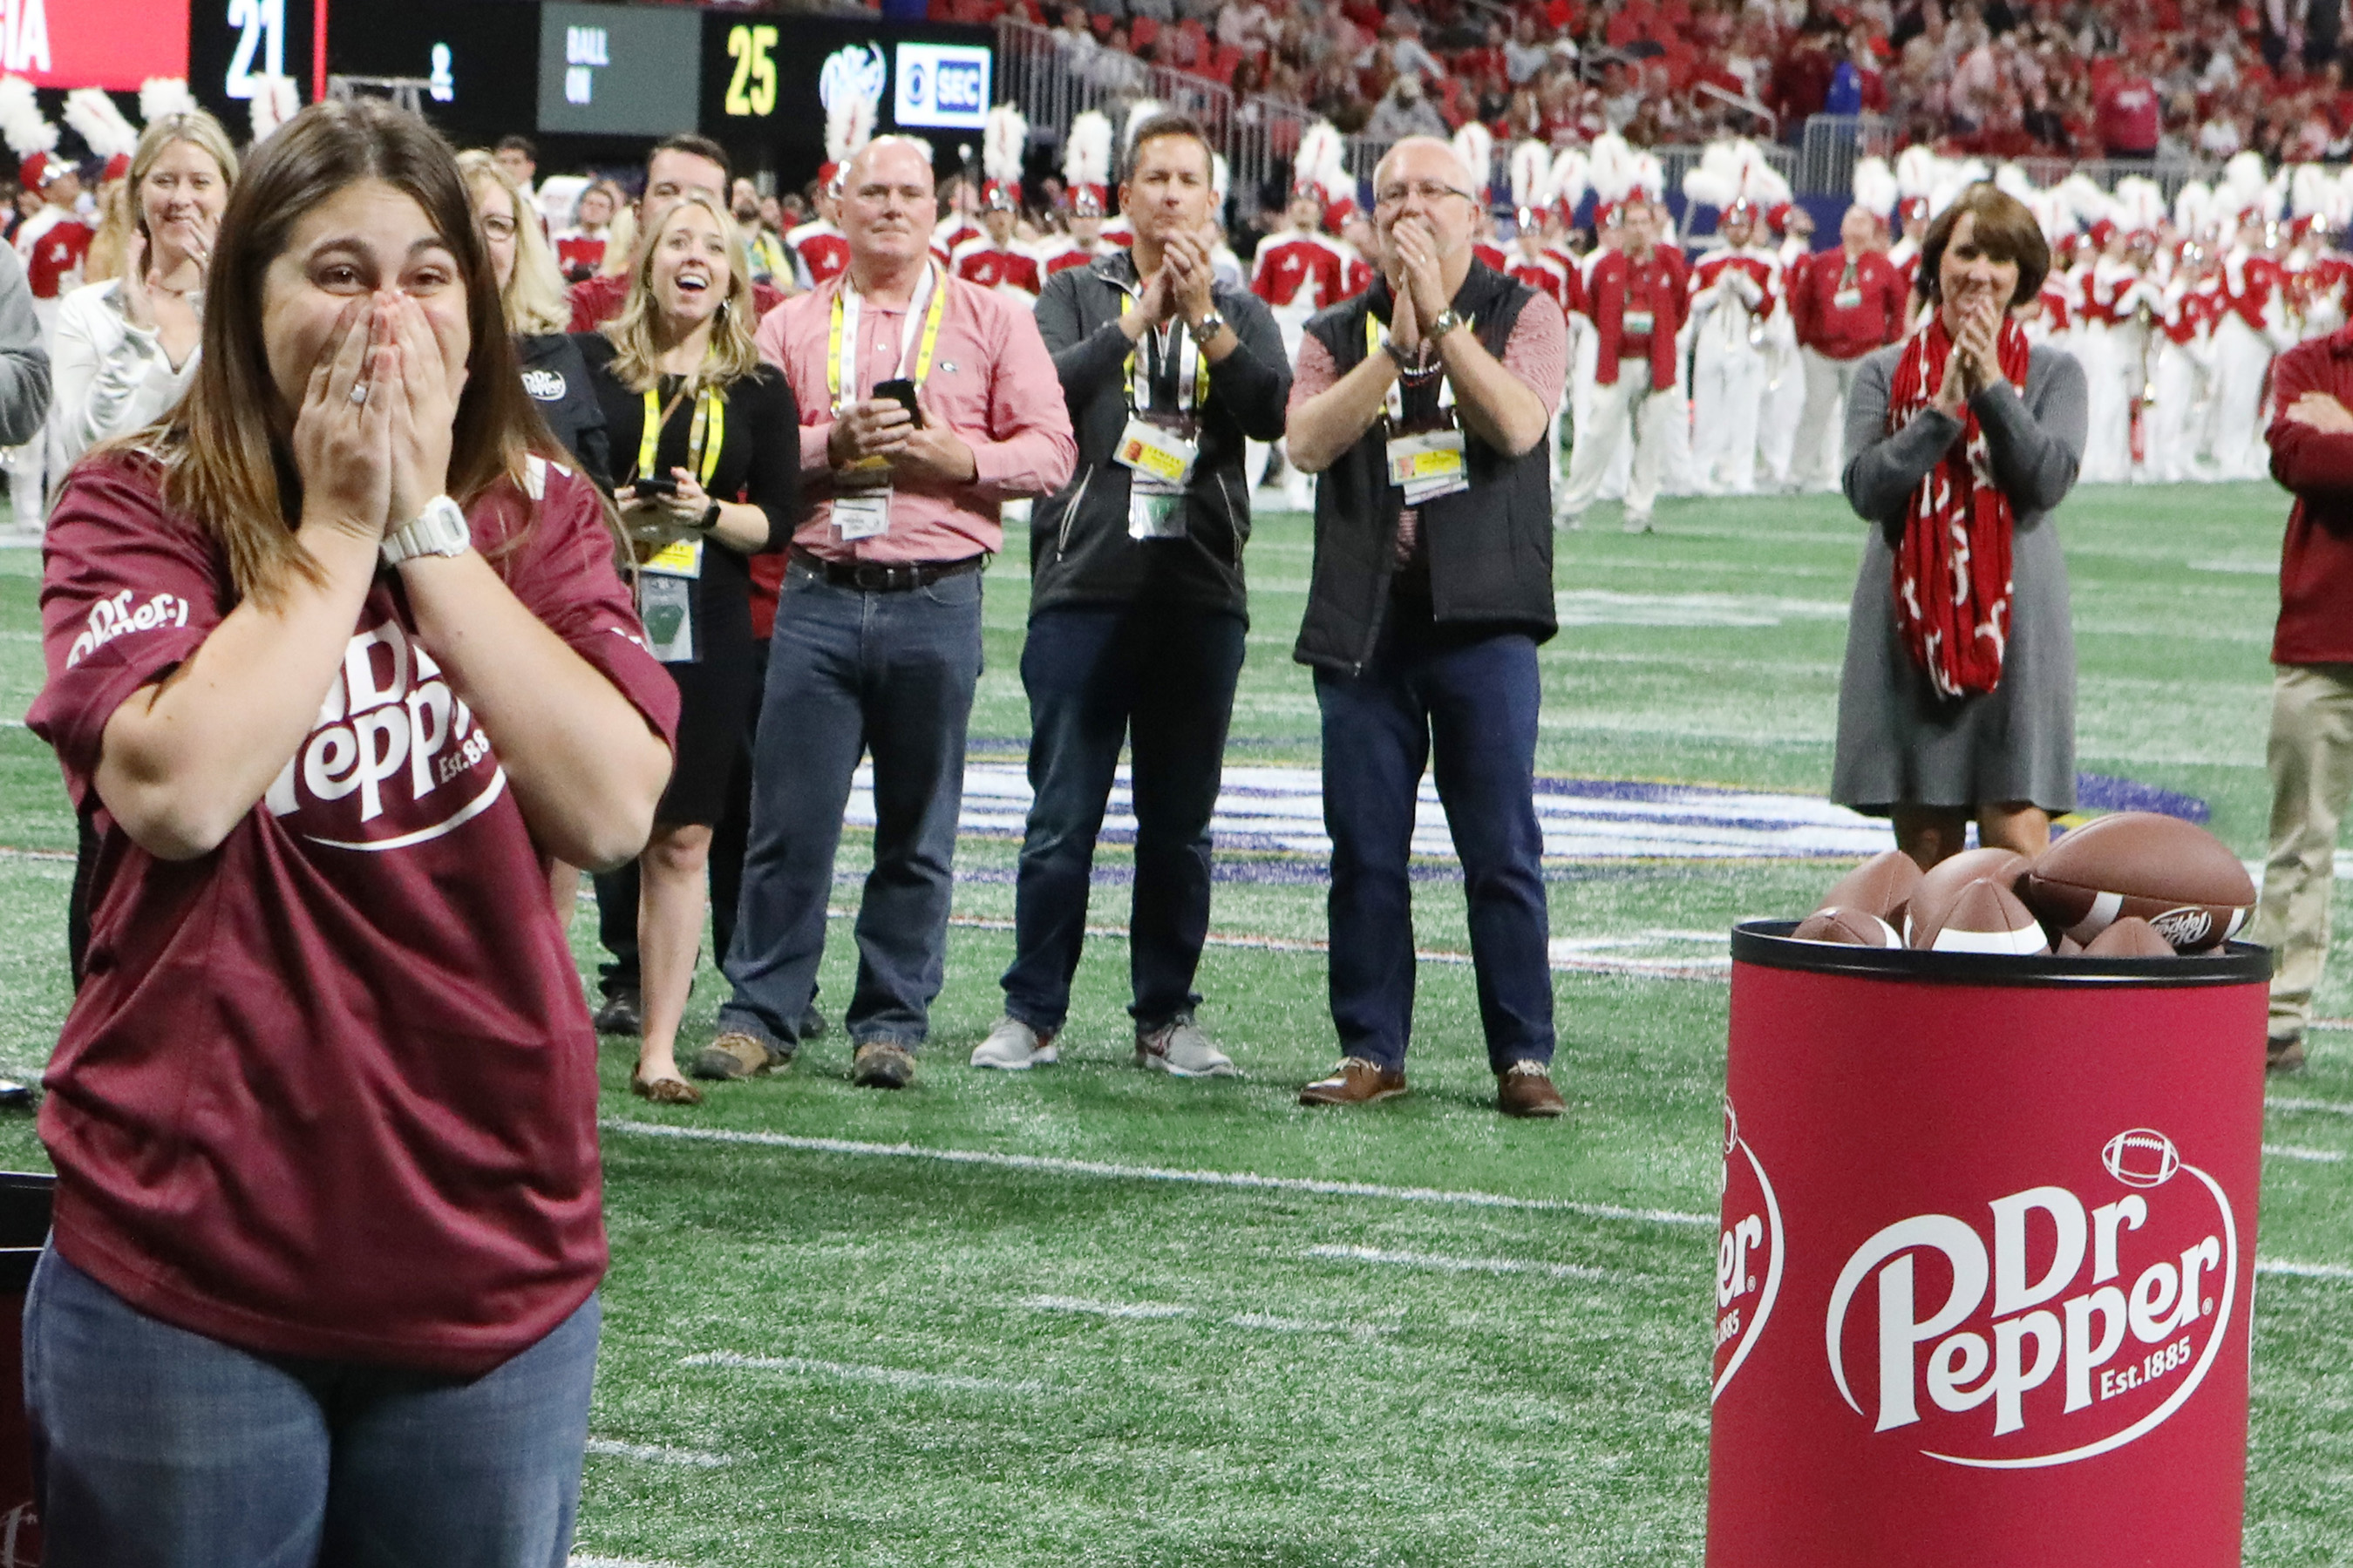 Alina Scarlett is in shock after winning $100,000 in tuition after competing in the Dr Pepper Tuition Giveaway during halftime of the SEC Conference Championship